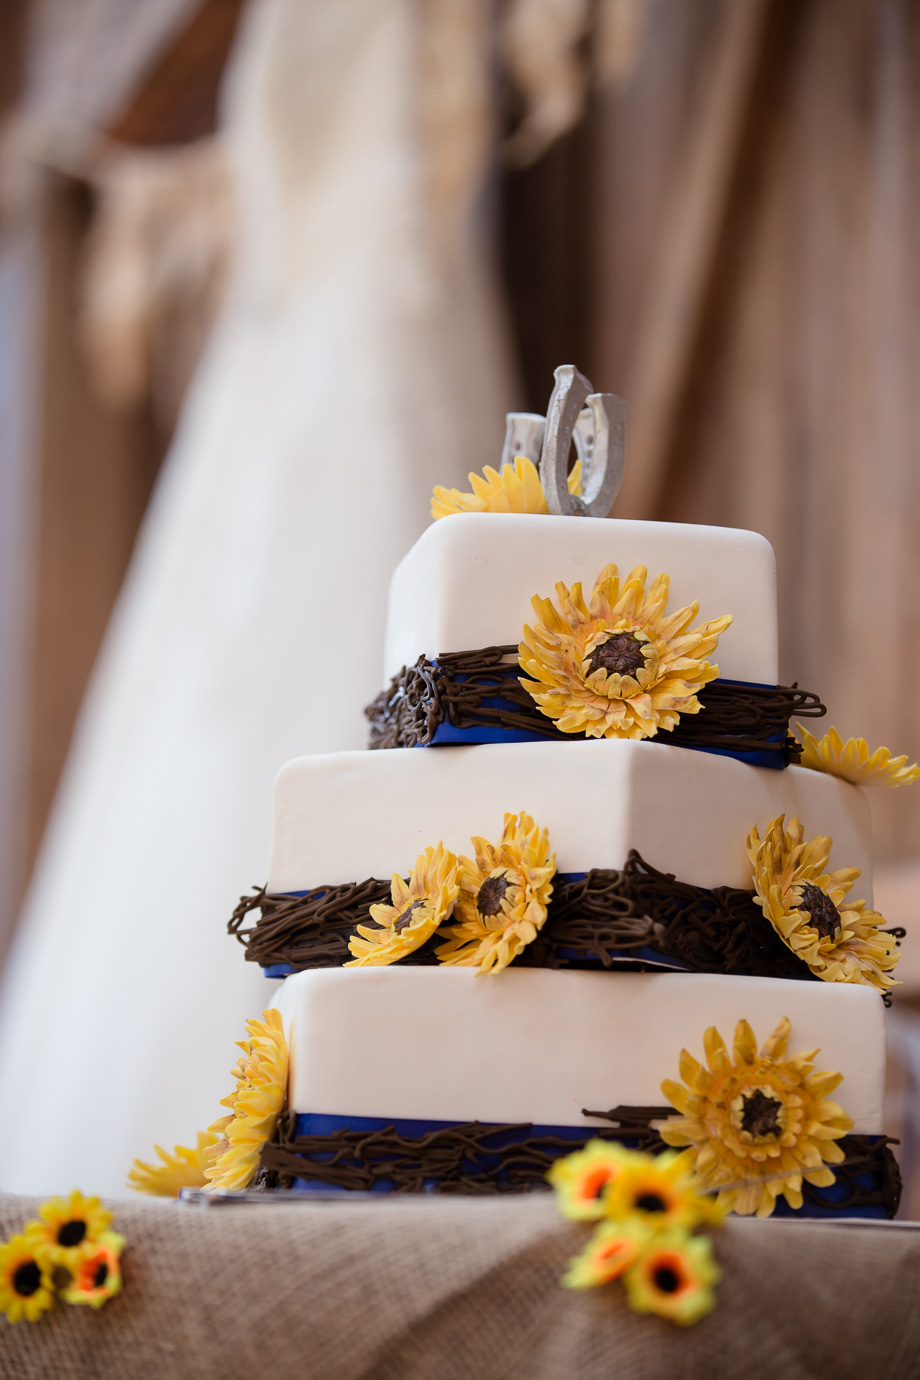 Wedding cake with flowers and horseshoe topper and wedding gown hanging in background